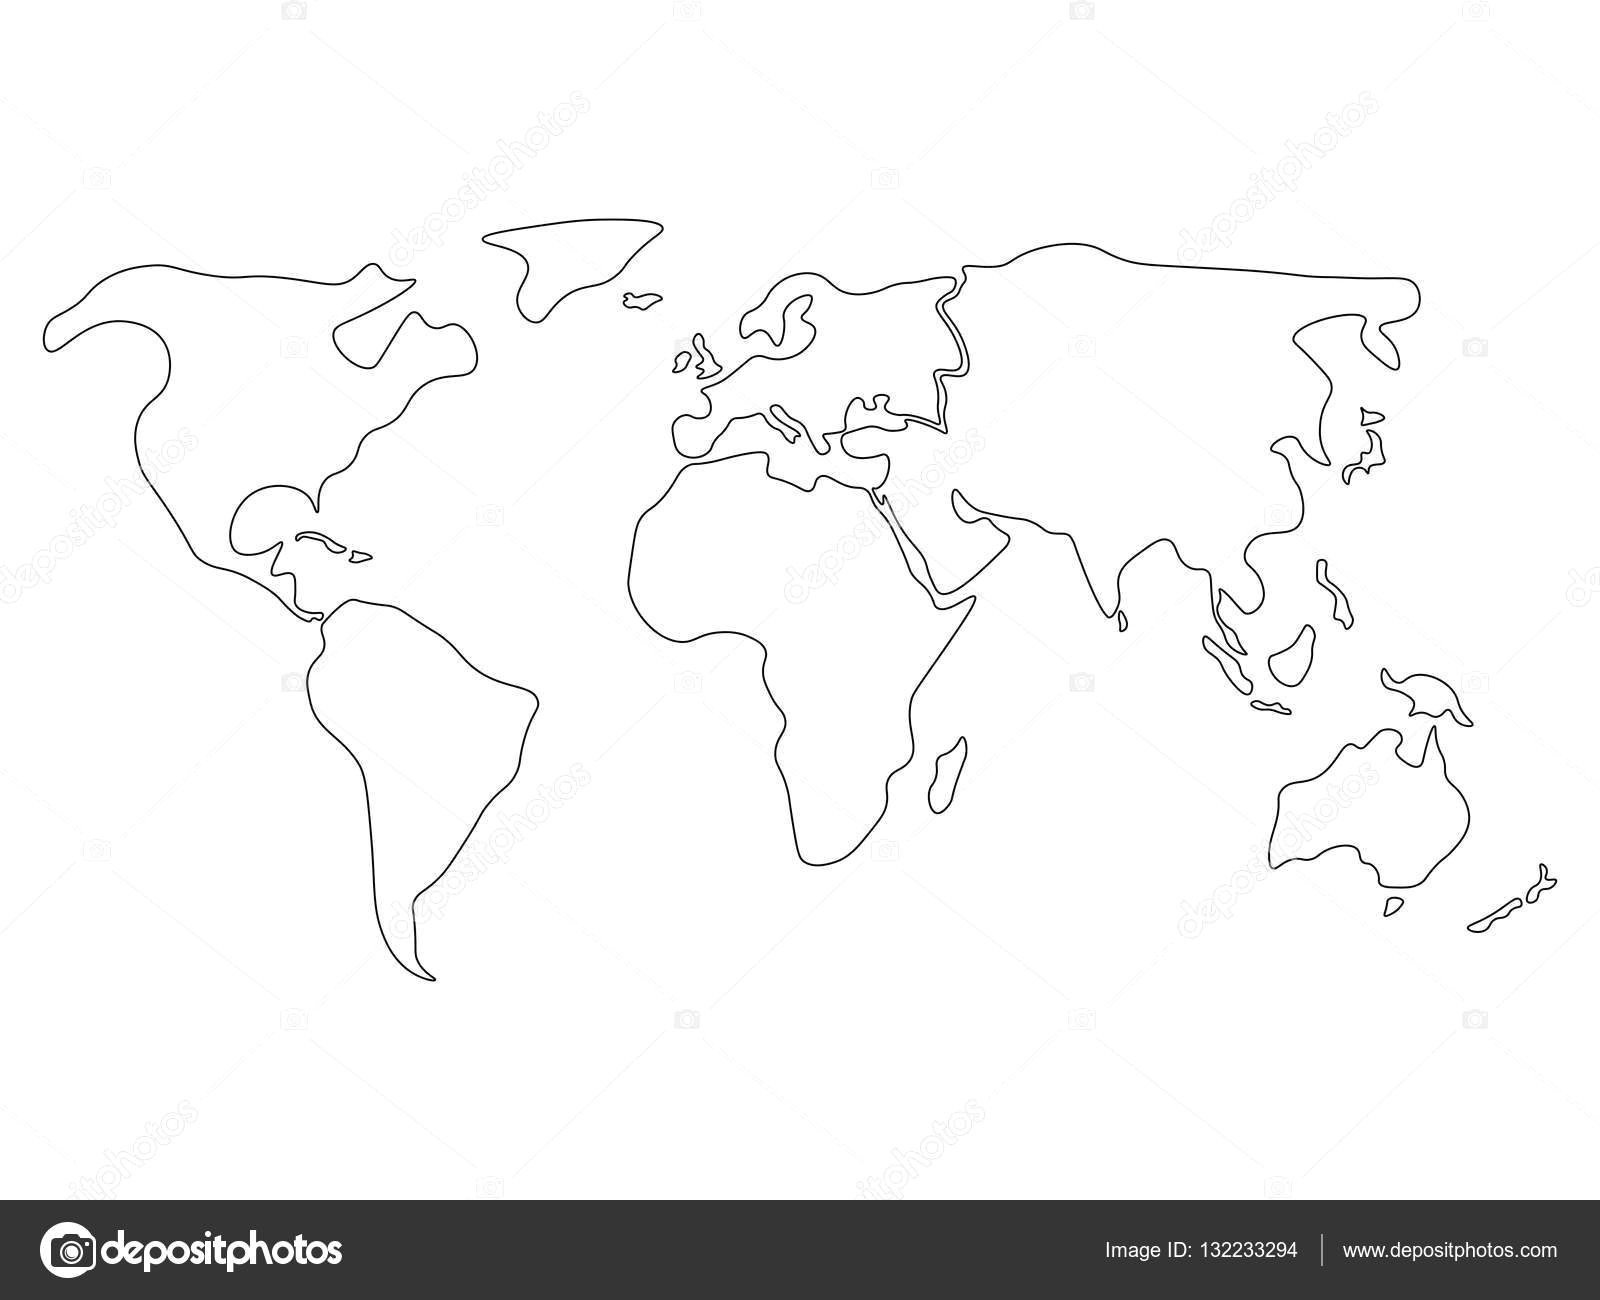 Easy to Draw island Easy Draw Map Of the World Map Easy to Draw Easy World Maps